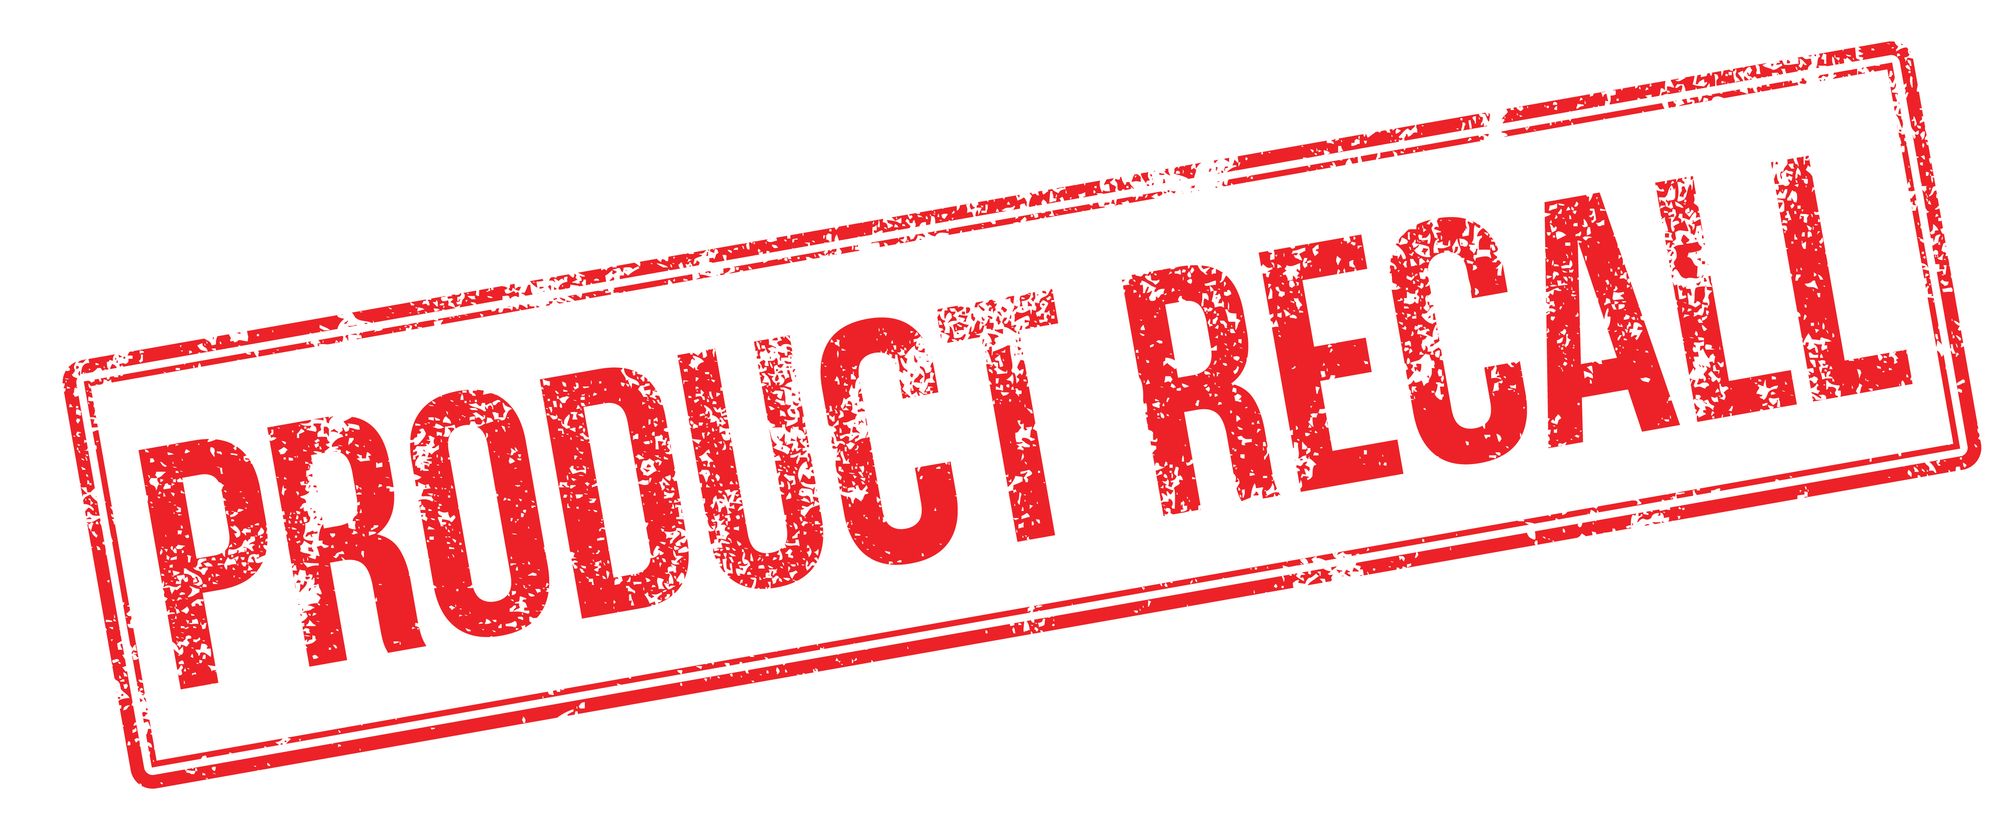 Product recall stamp regarding the hazardous consumer product recalls issued by Health Canada 